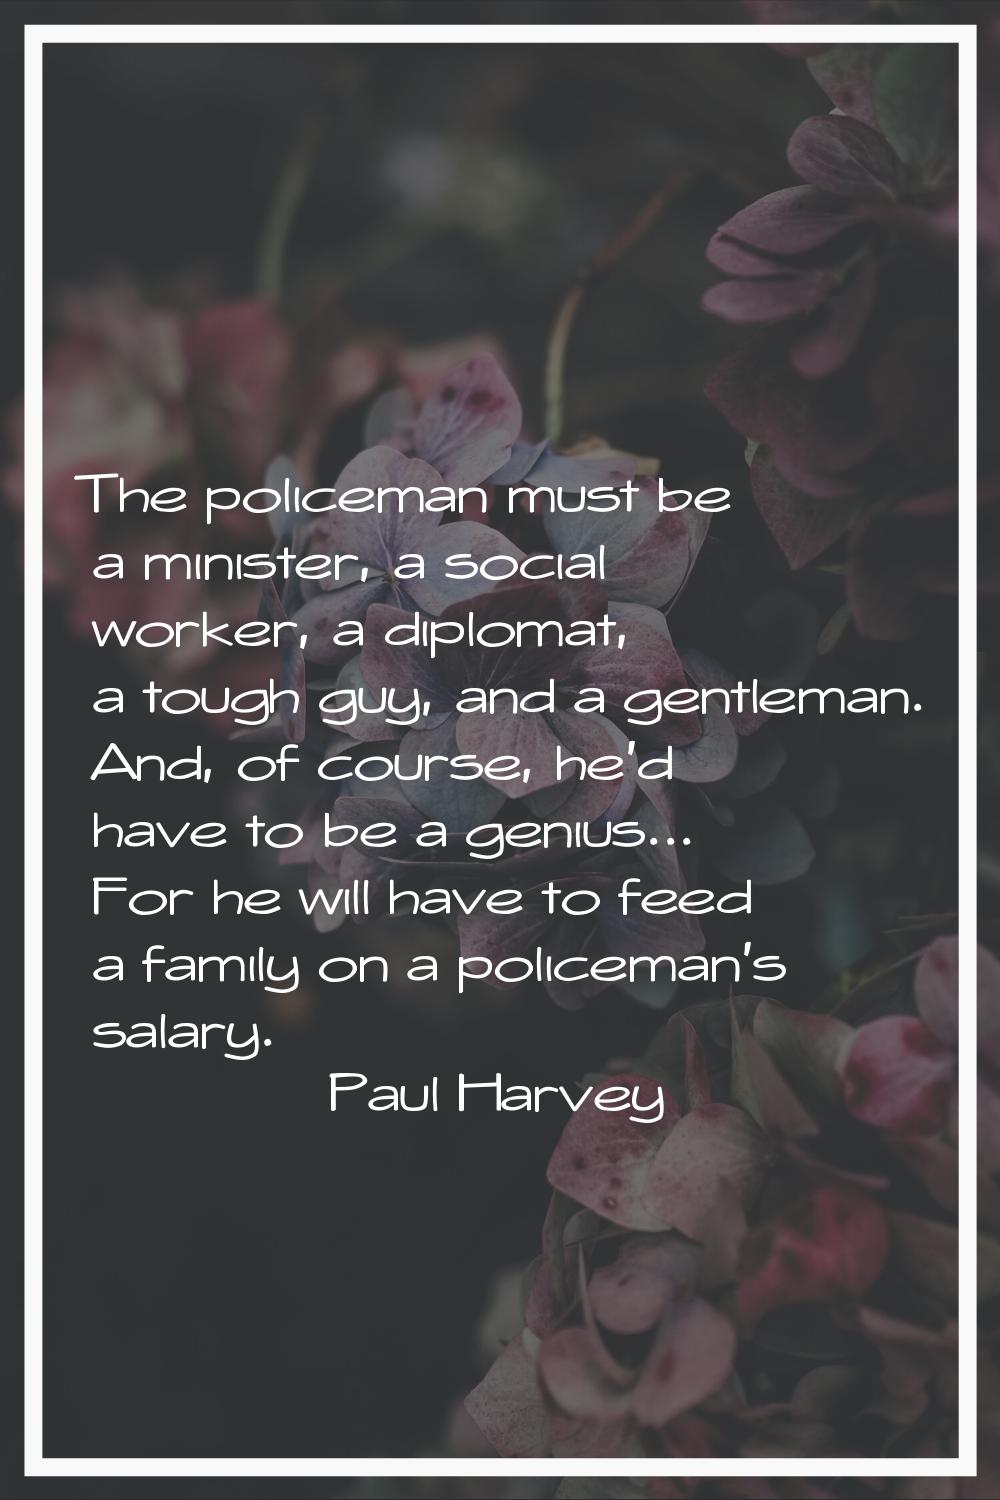 The policeman must be a minister, a social worker, a diplomat, a tough guy, and a gentleman. And, o